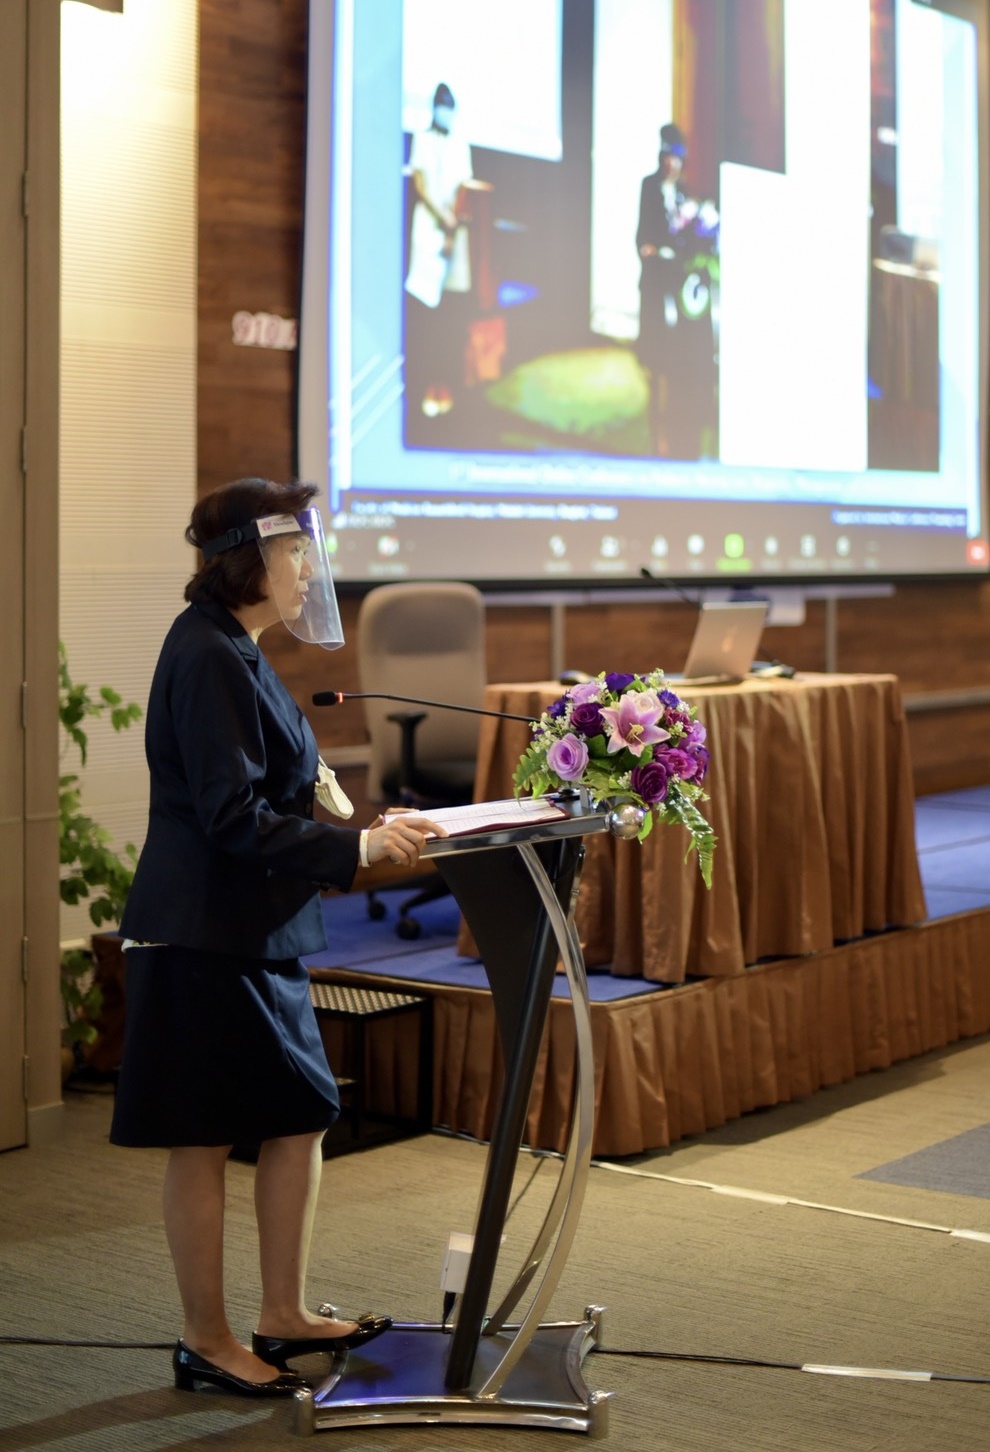 International Online Conference on Pediatric Hearing loss: Diagnosis, Management and Rehabilitation